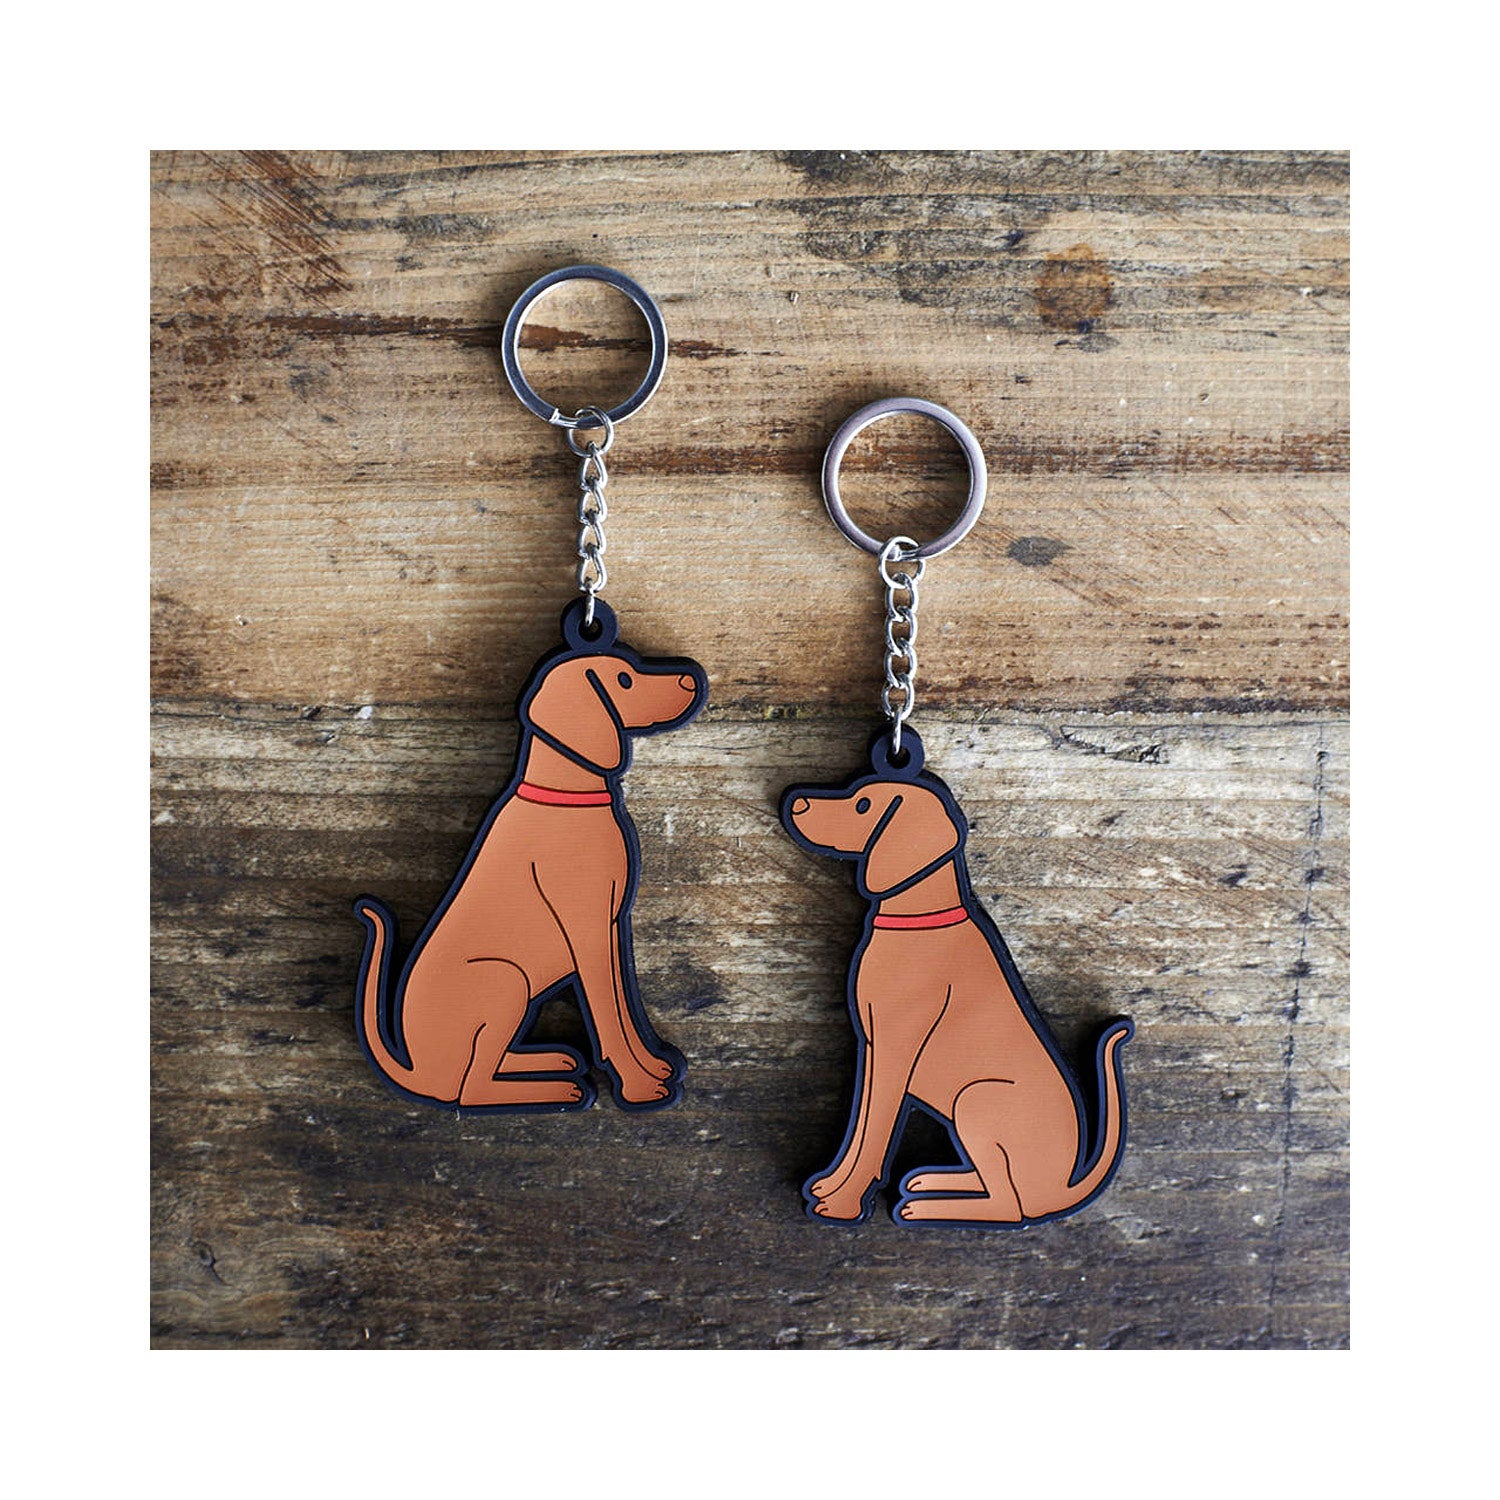 Dog Lover Gifts available at Dog Krazy Gifts - Joe The Vizsla Keyring - part of the Sweet William range available from Dog Krazy Gifts